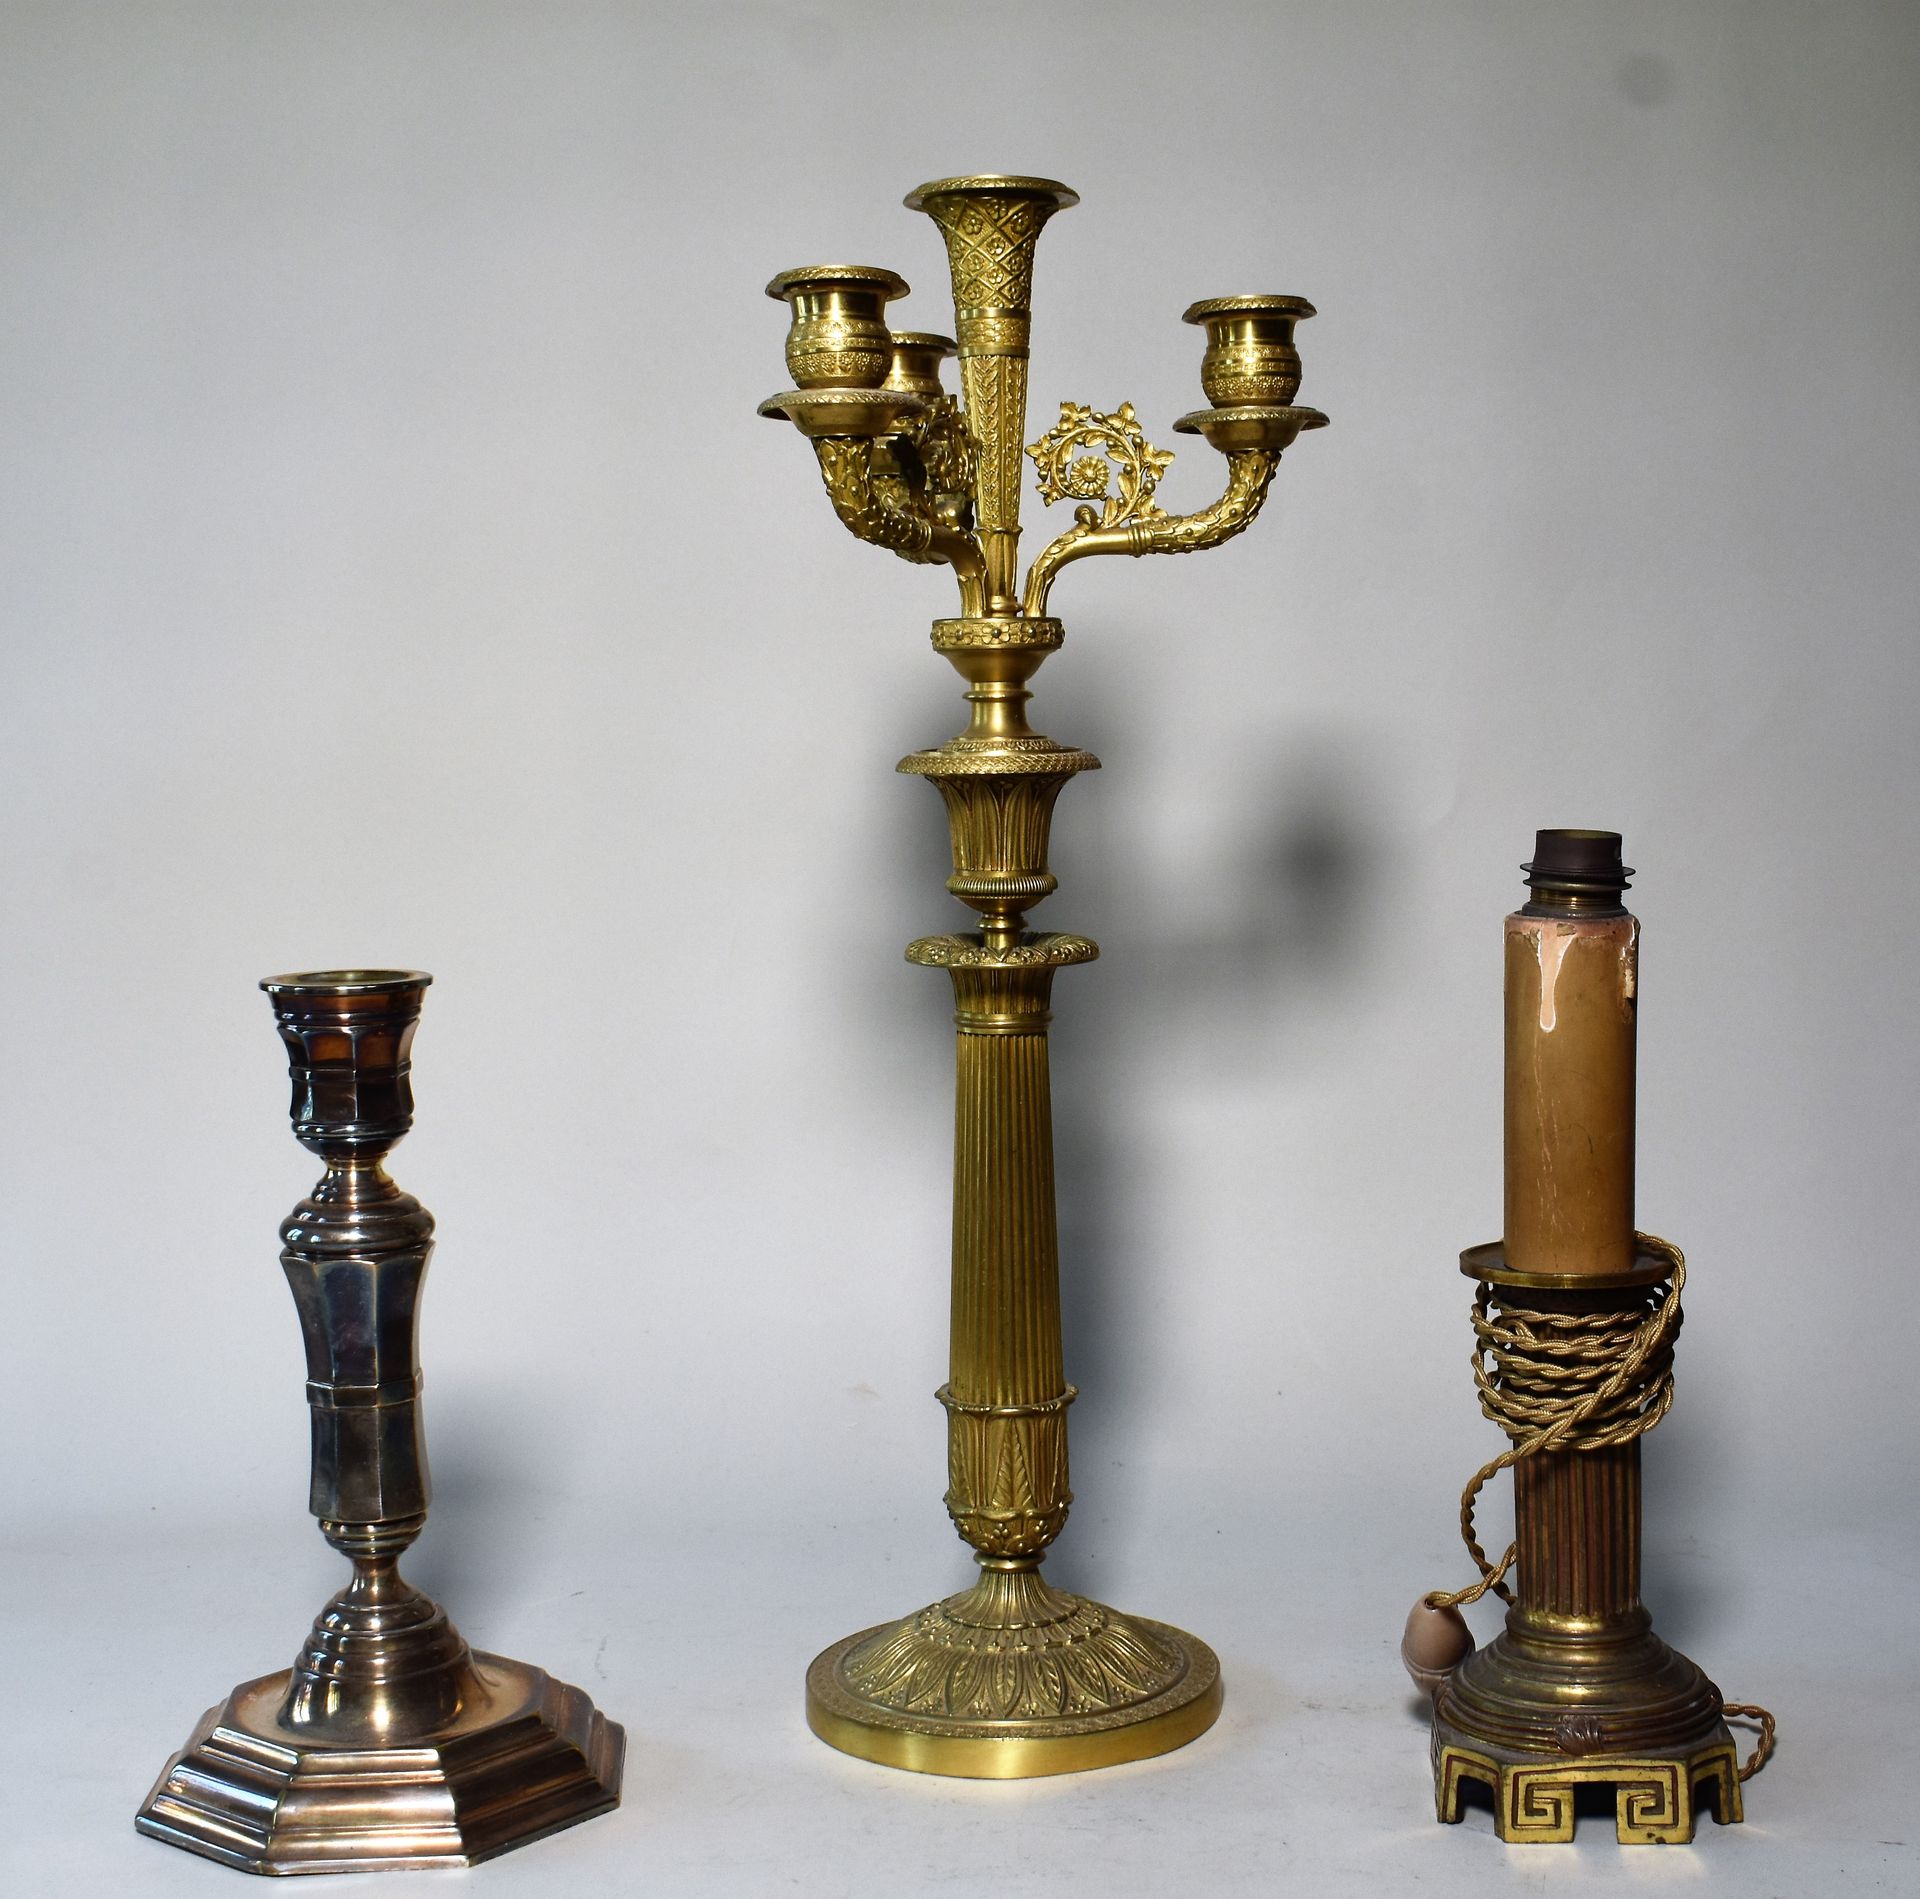 Null A four lights gilt bronze CANDELABRE, XIXth century. Height 48 cm

JOINTLY:&hellip;